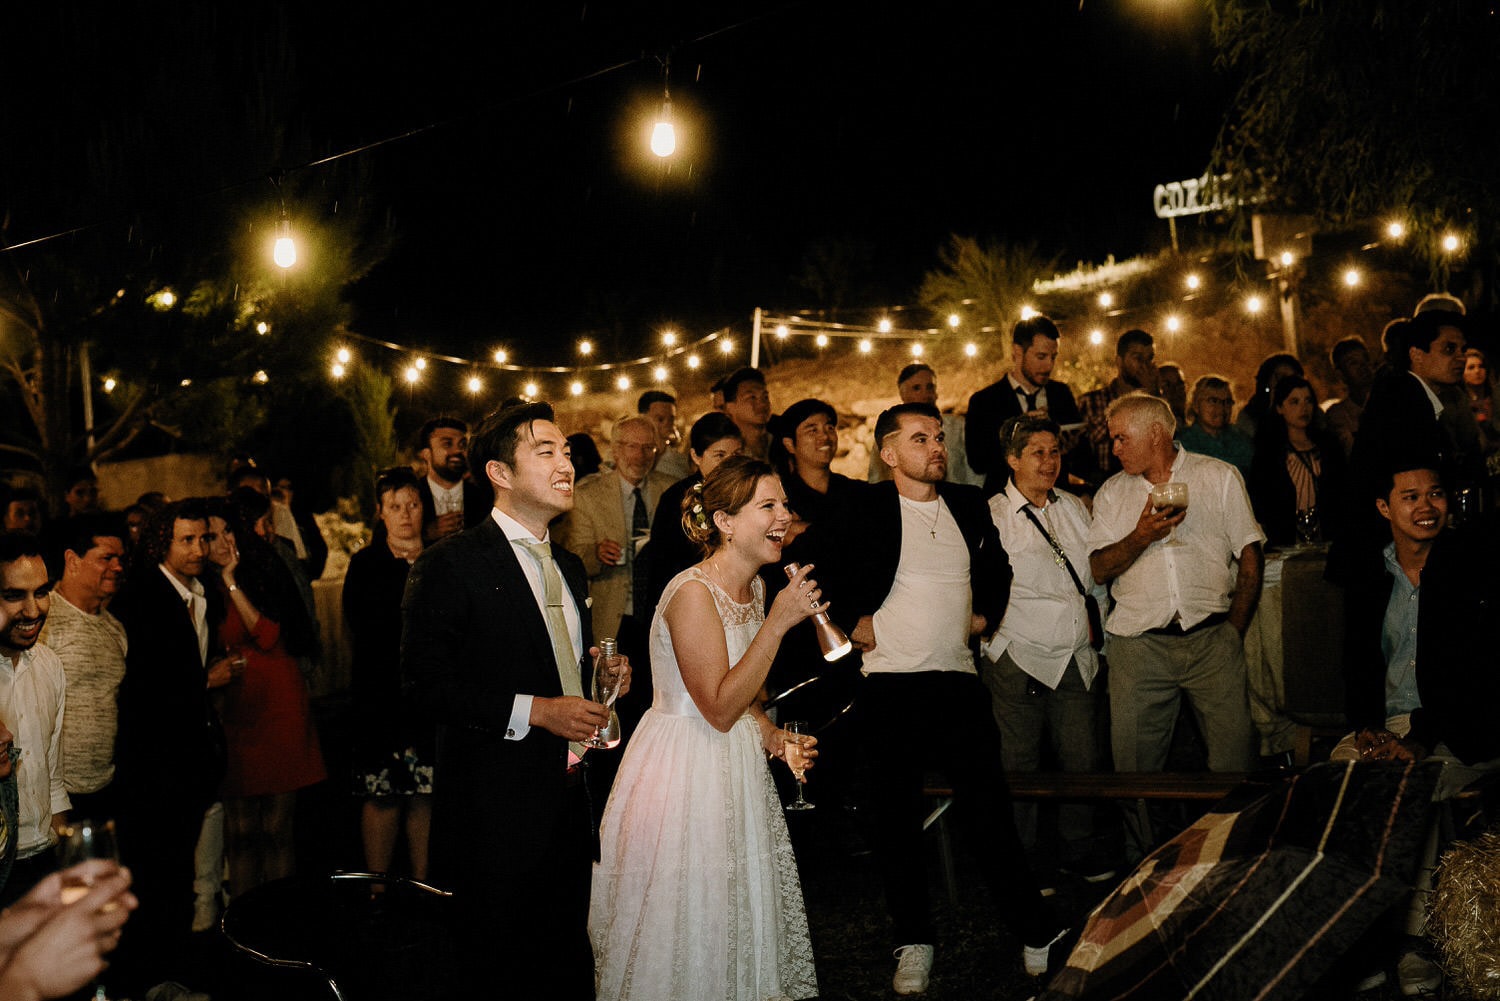 Charming Destination Wedding in the Portuguese Countryside - bride and groom having fun while singing karaoke at their wedding